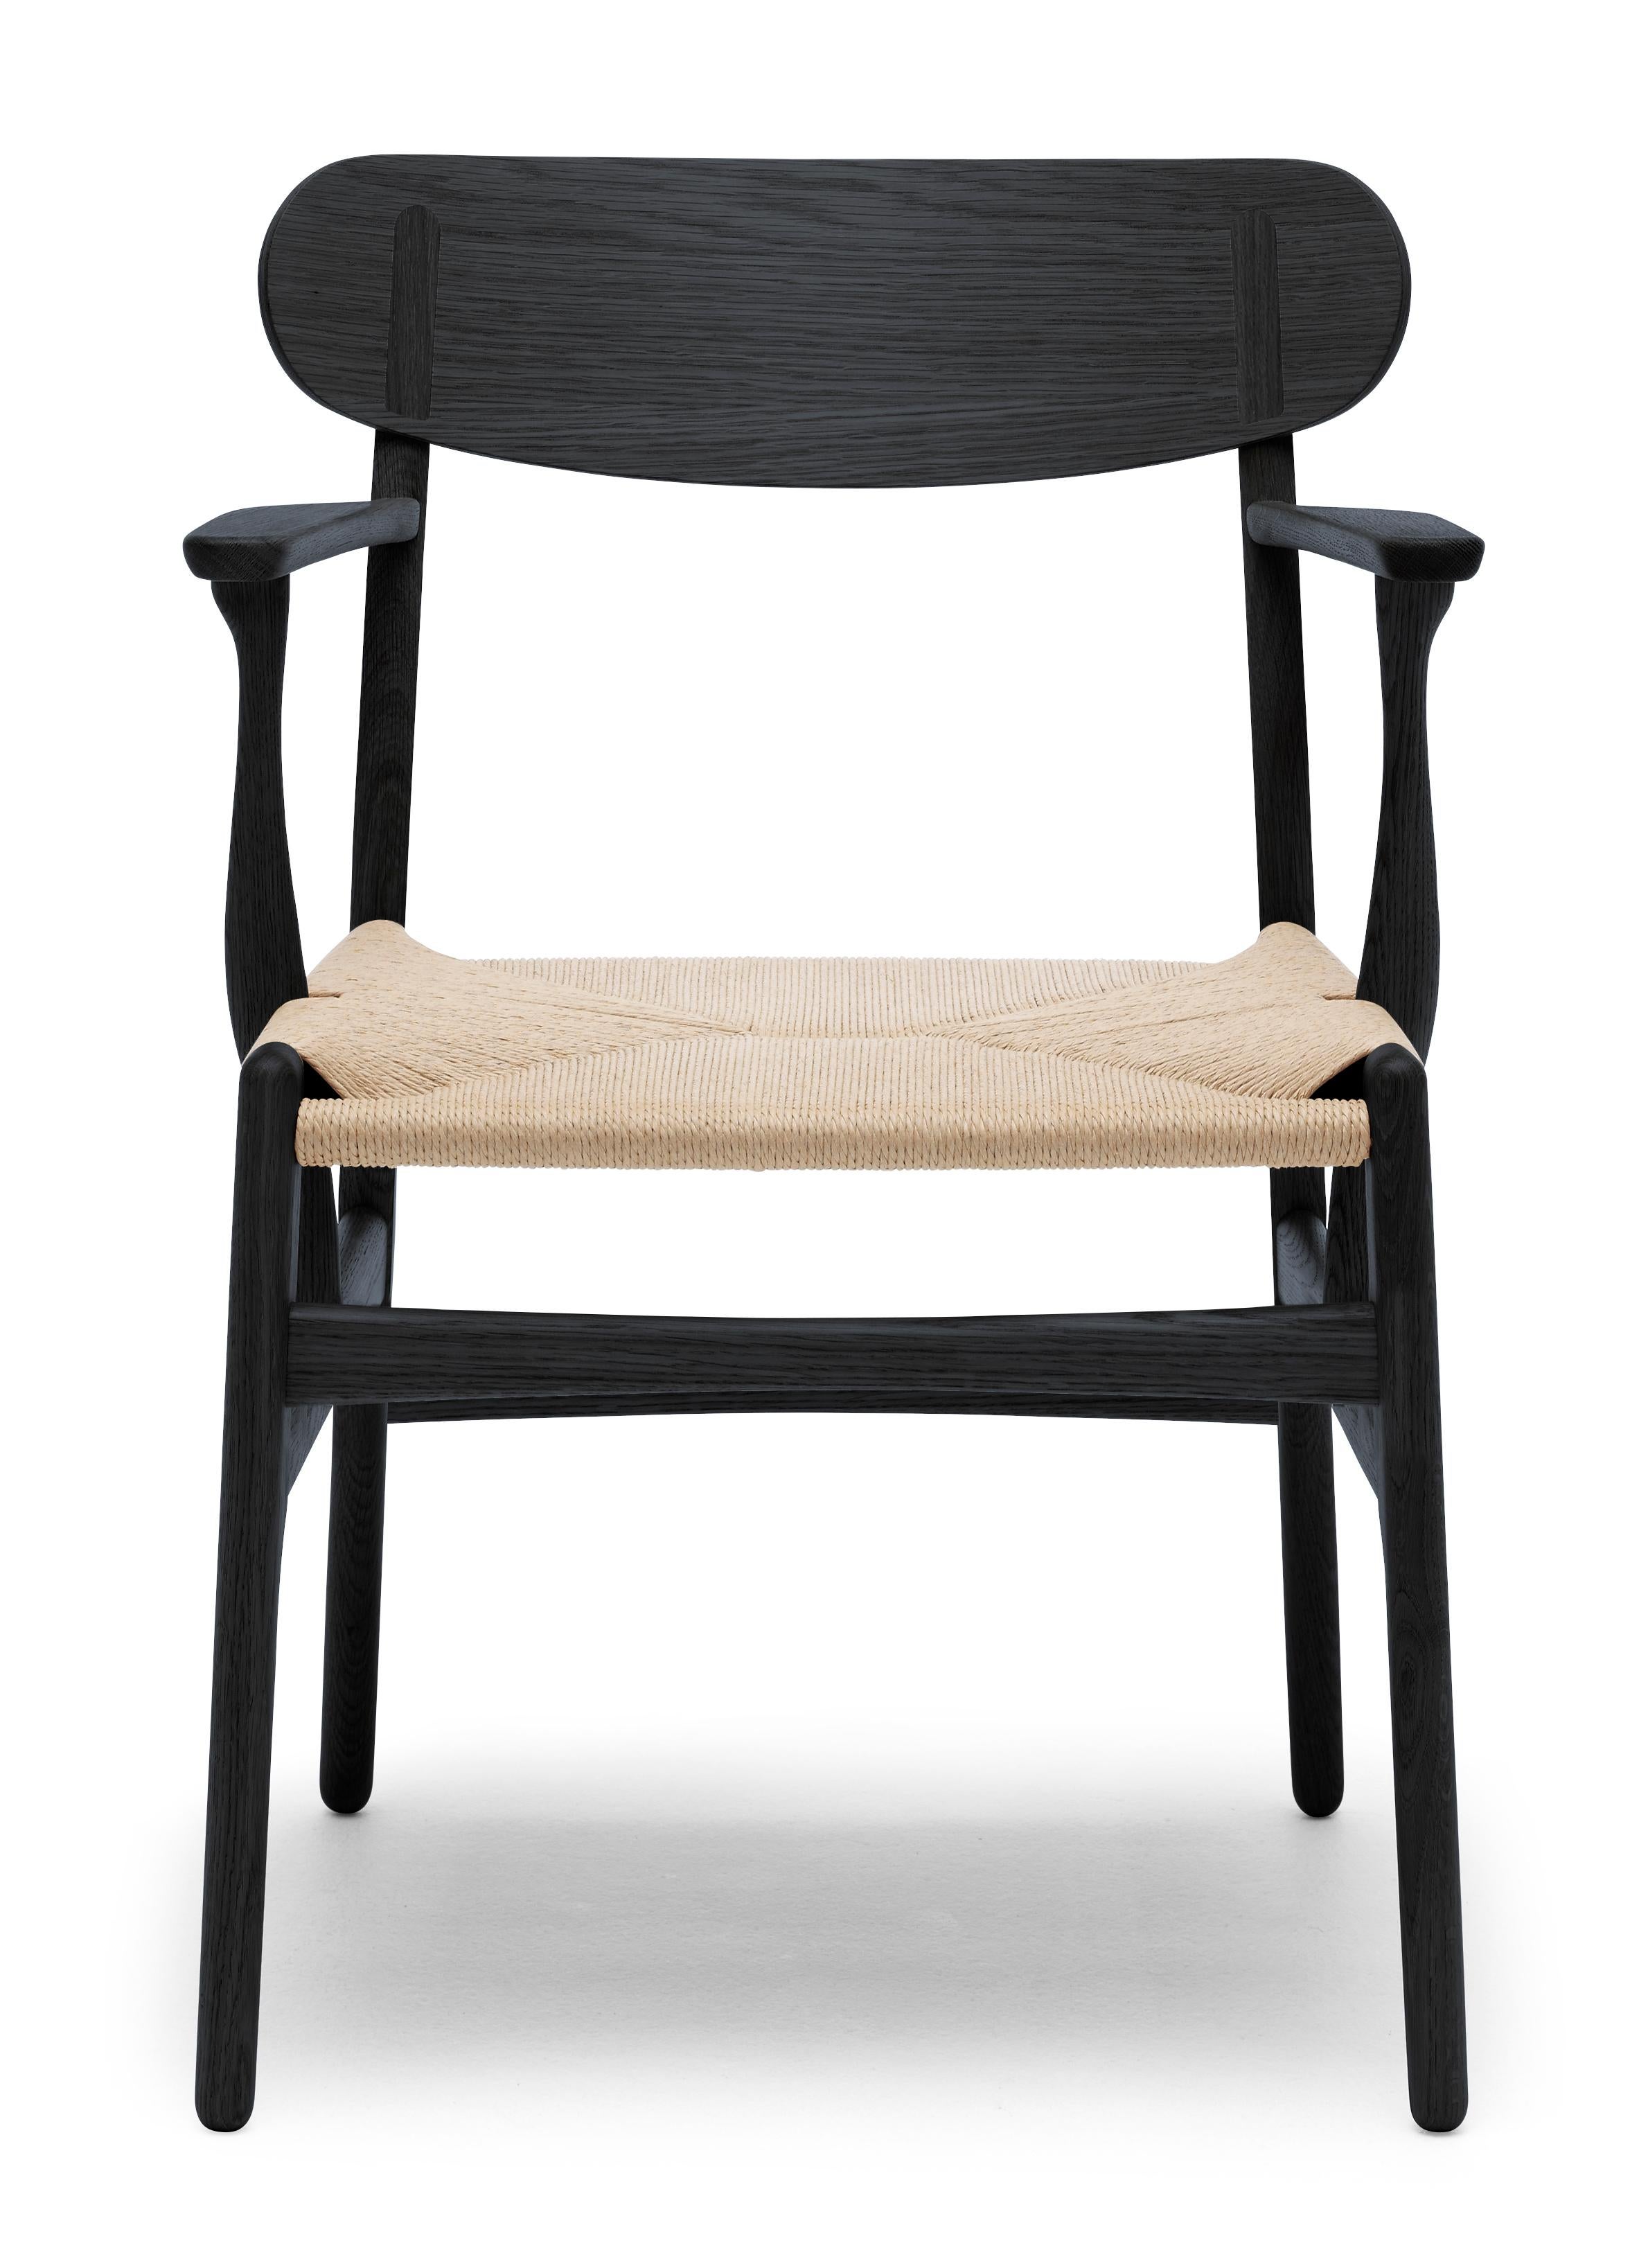 Black (Oak Painted blacks9000-N) CH26 Dining Chair in Wood Finishes with Natural Papercord Seat by Hans J. Wegner